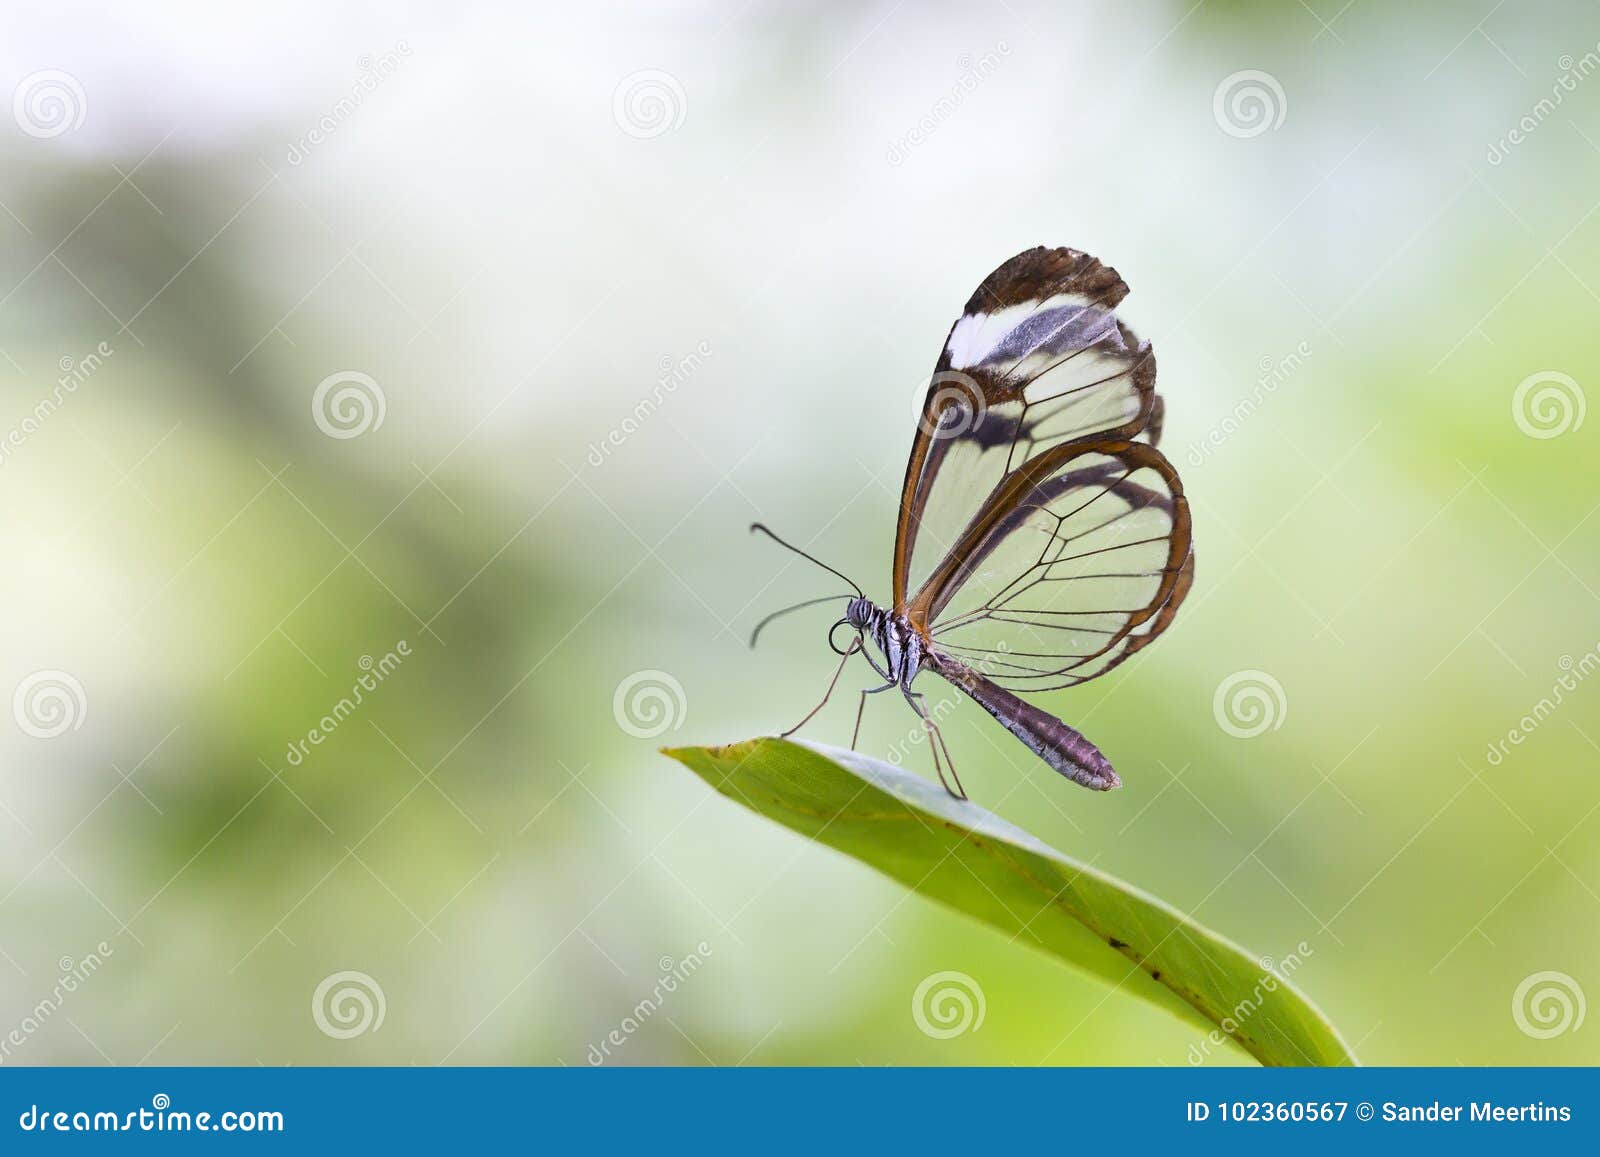 close up of greta oto, the glasswinged butterfly